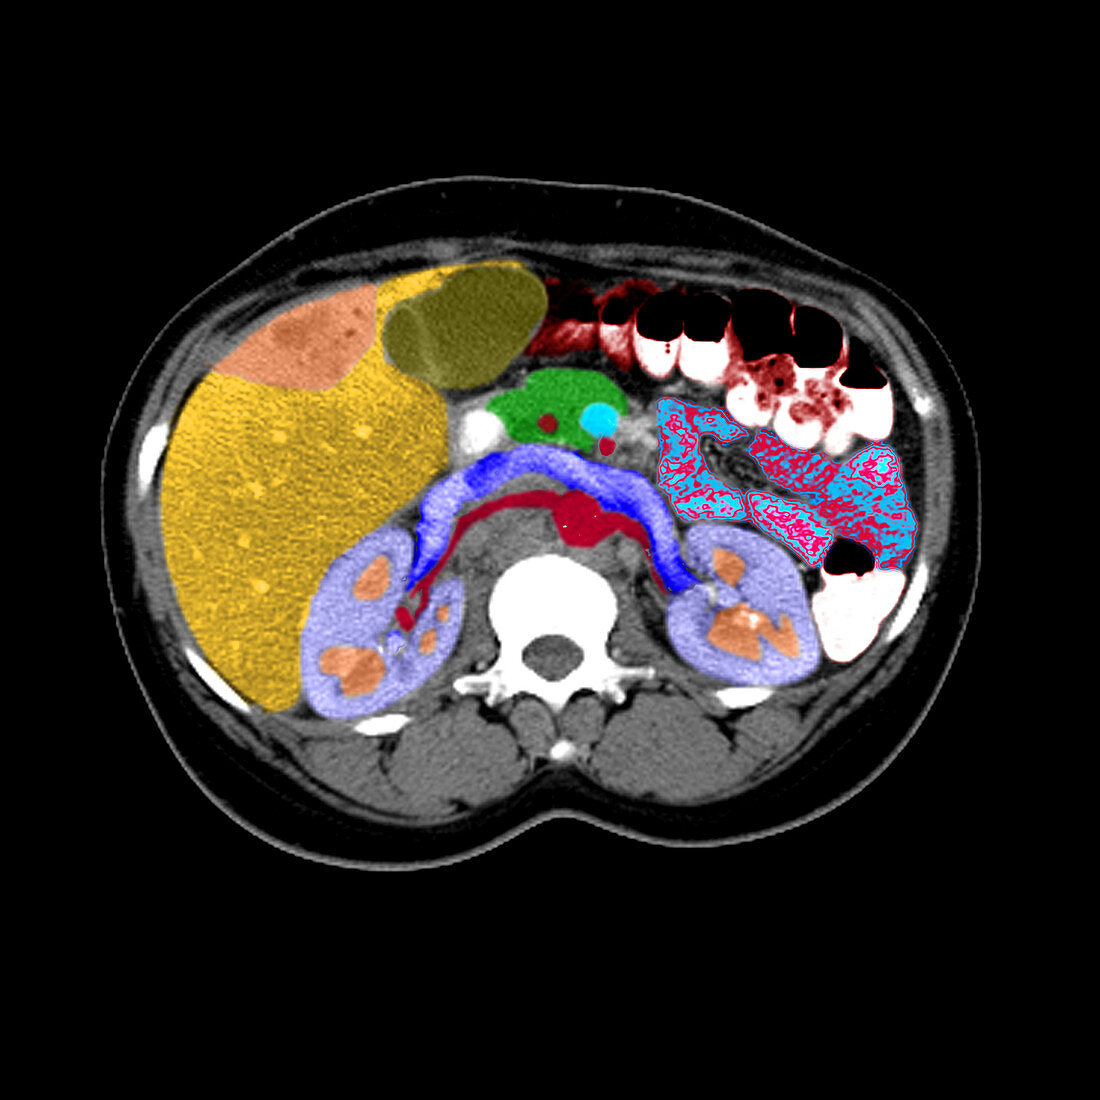 CT Cross Section of Liver Tumor